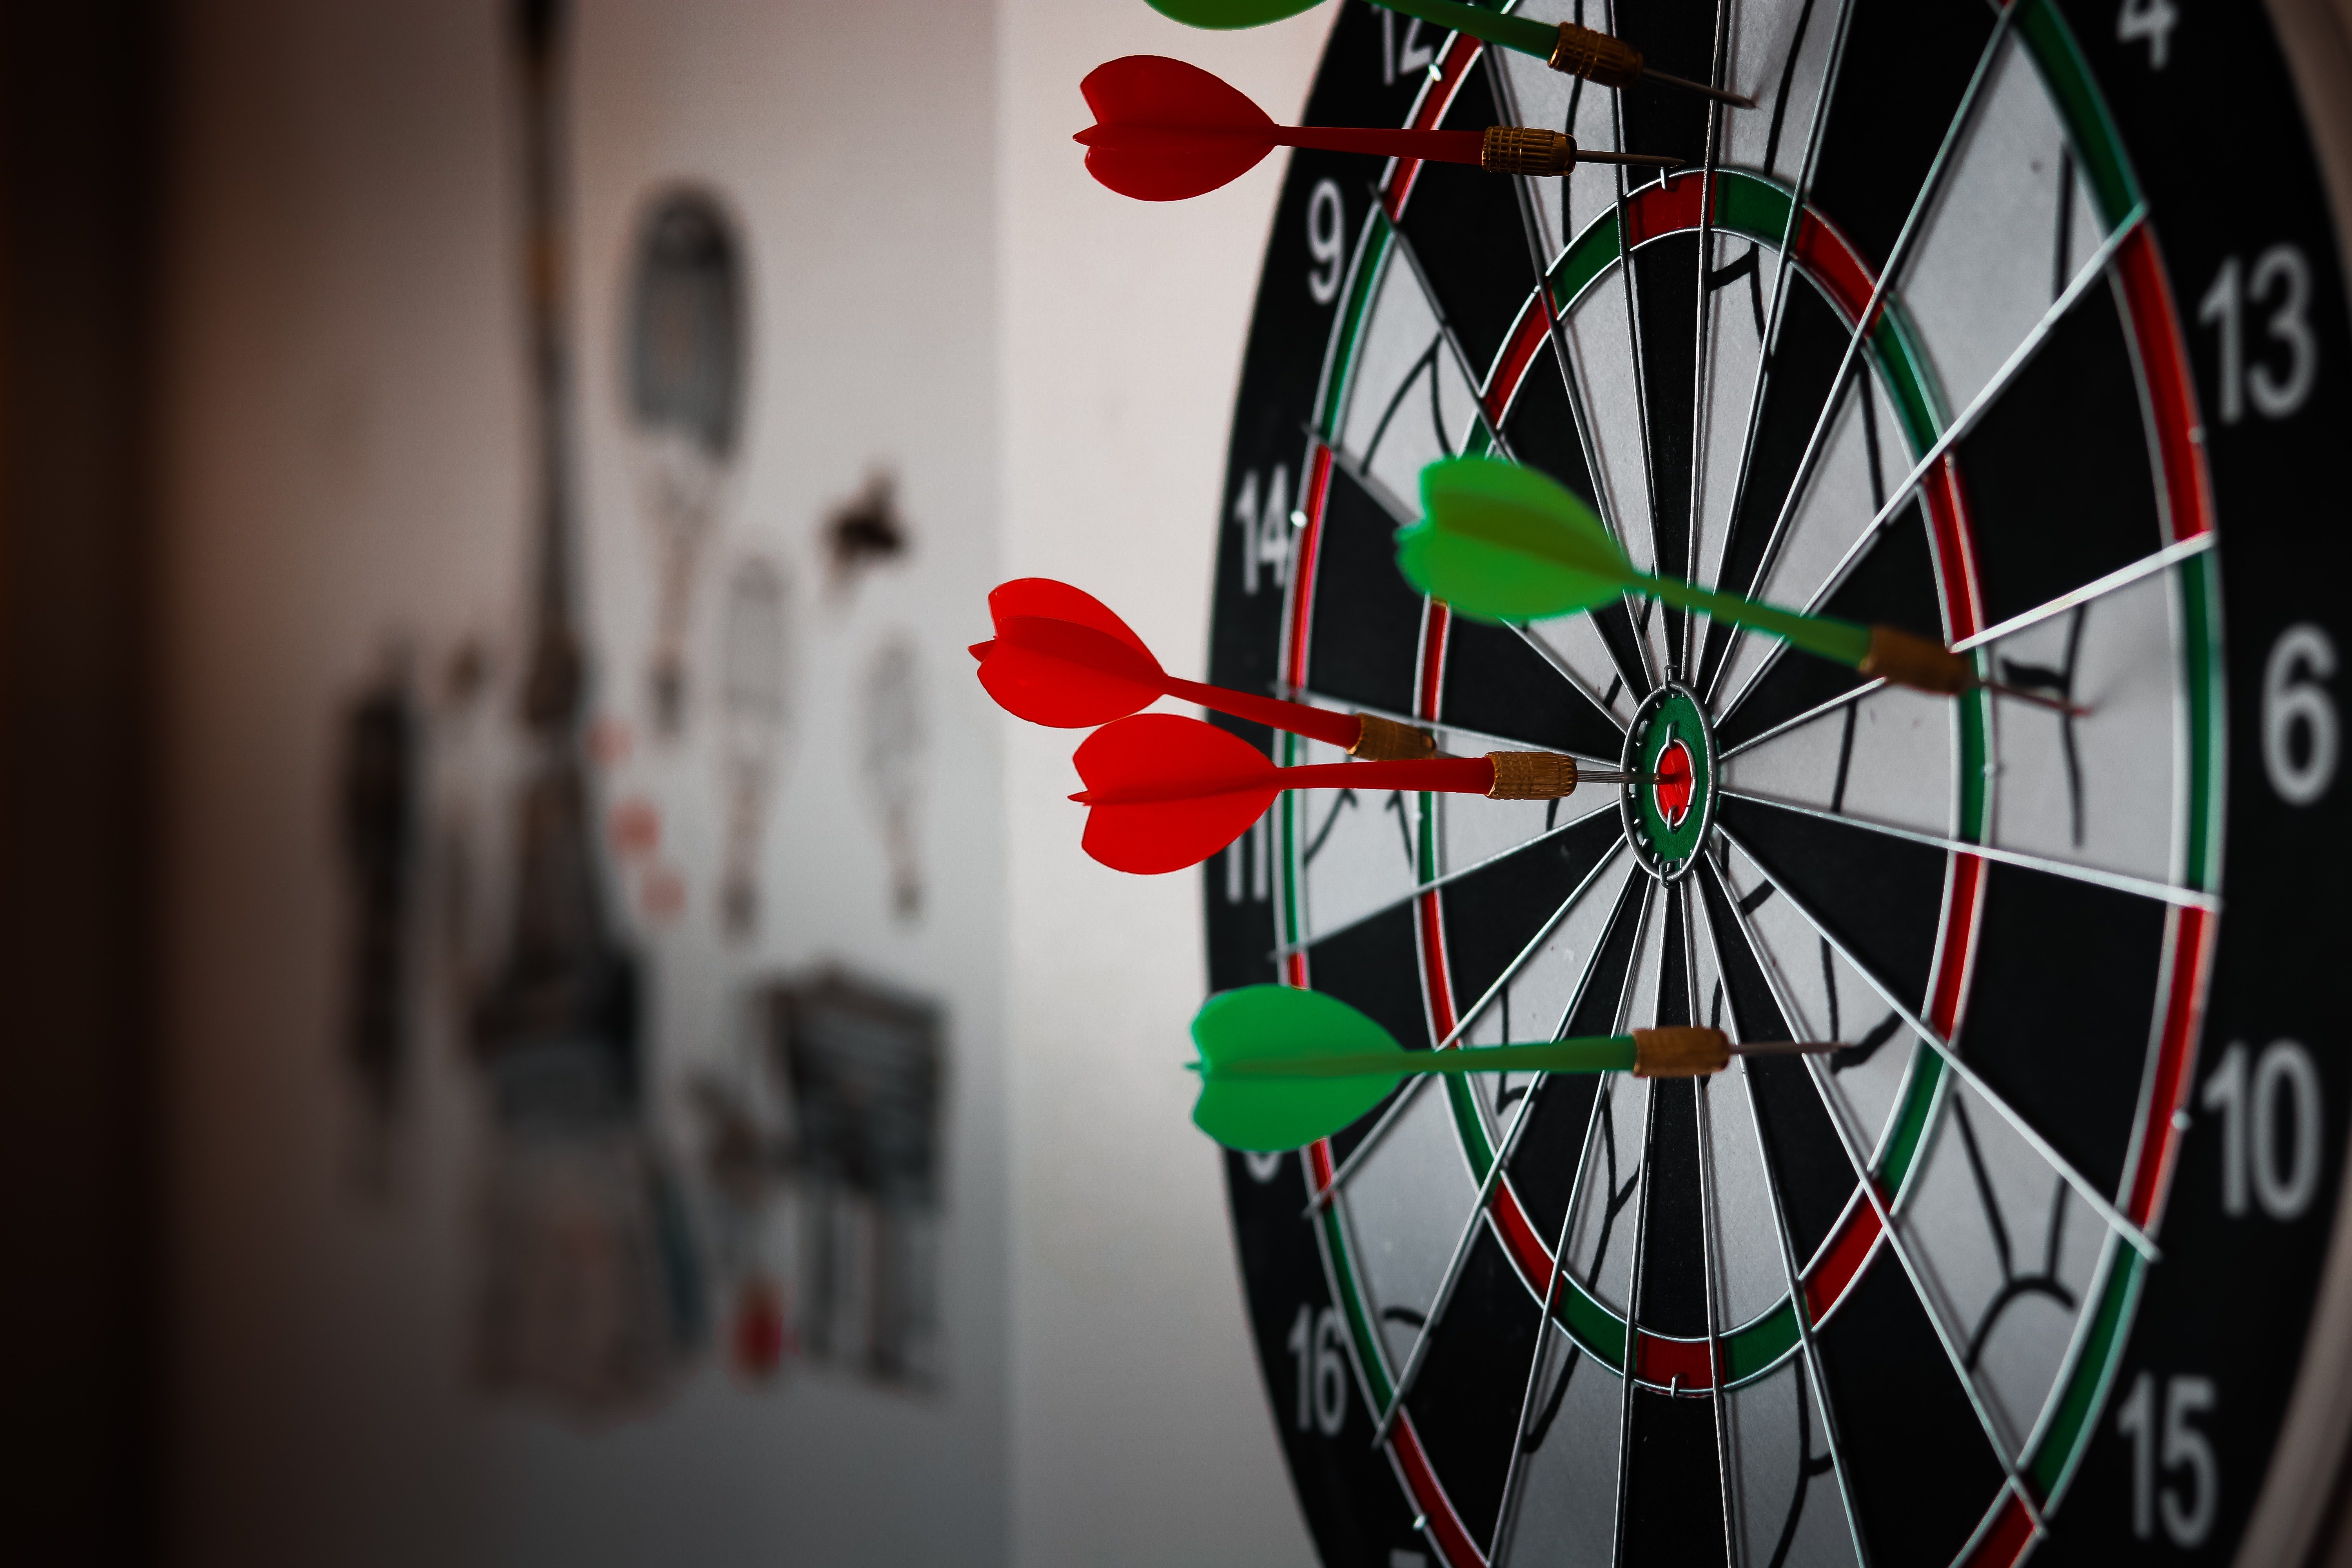 Behavioral Targeting vs. Contextual Targeting: Which Is Better?